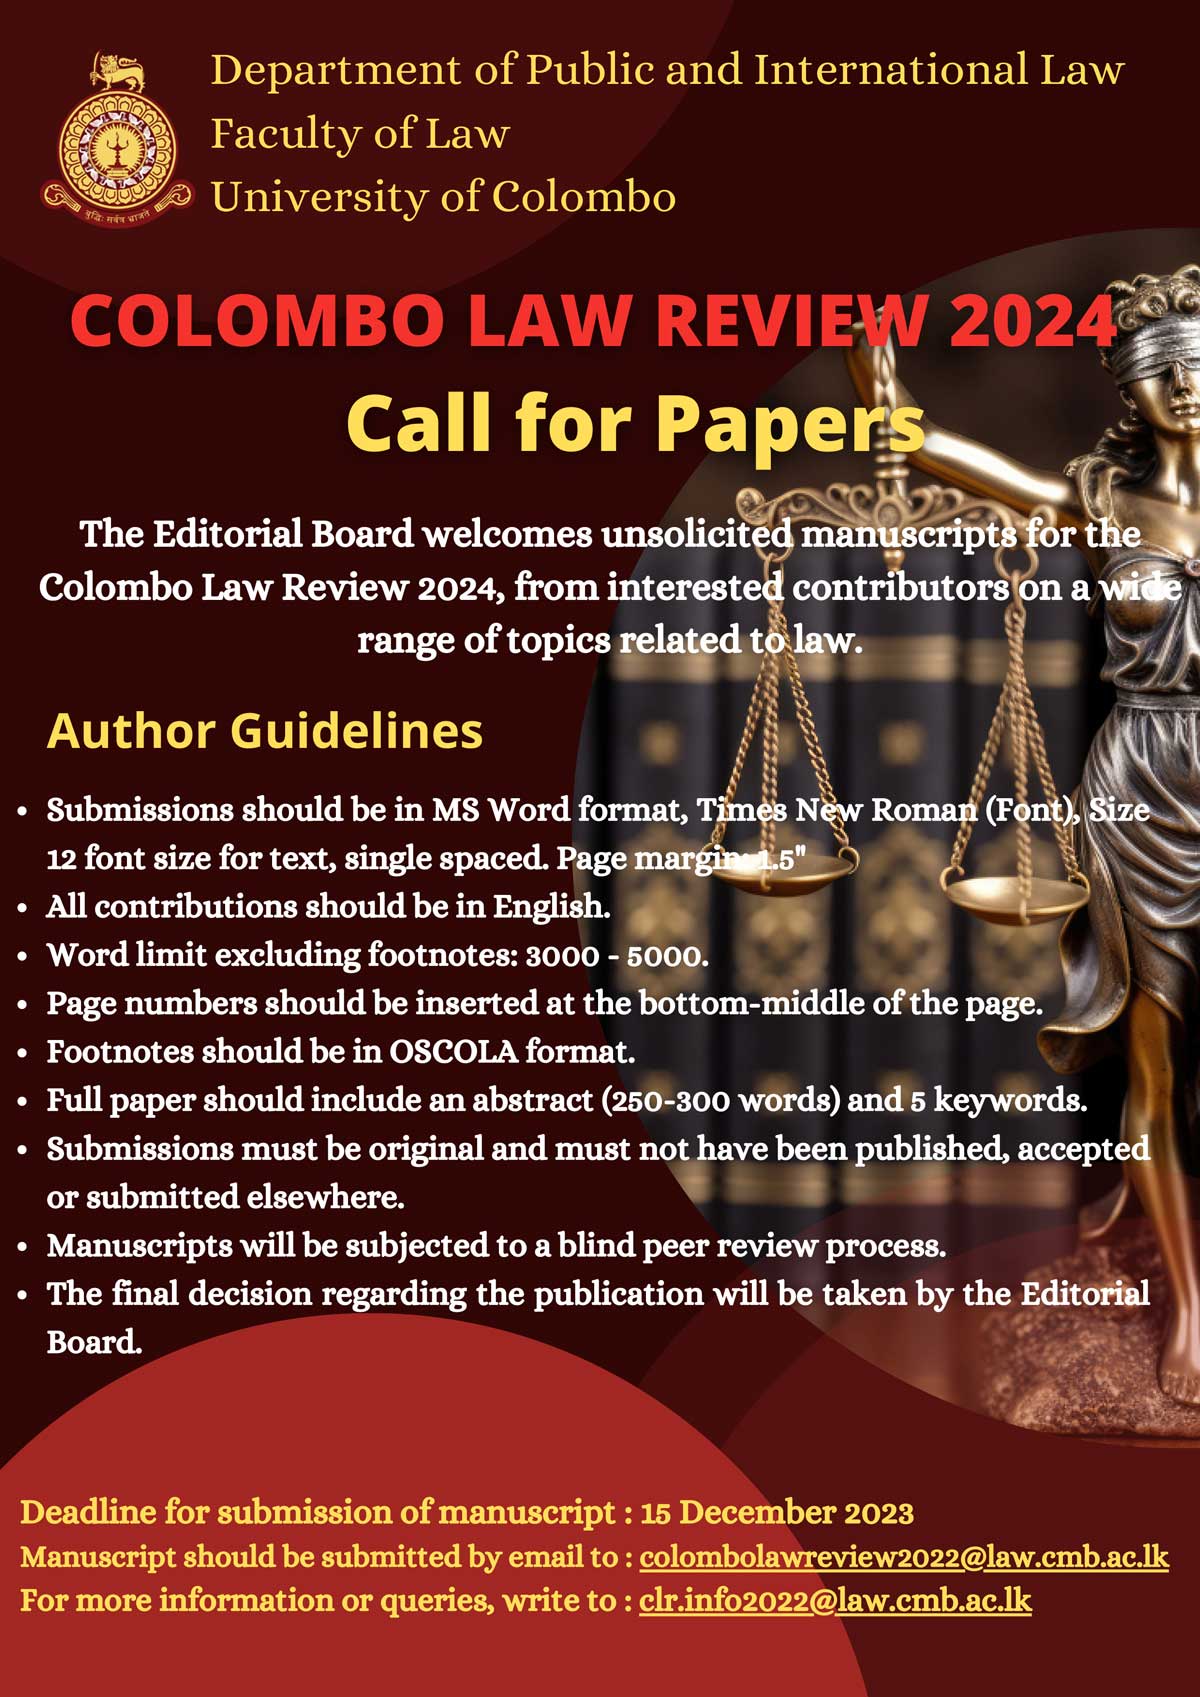 Colombo Law Review (CLR) – Call for papers 2024